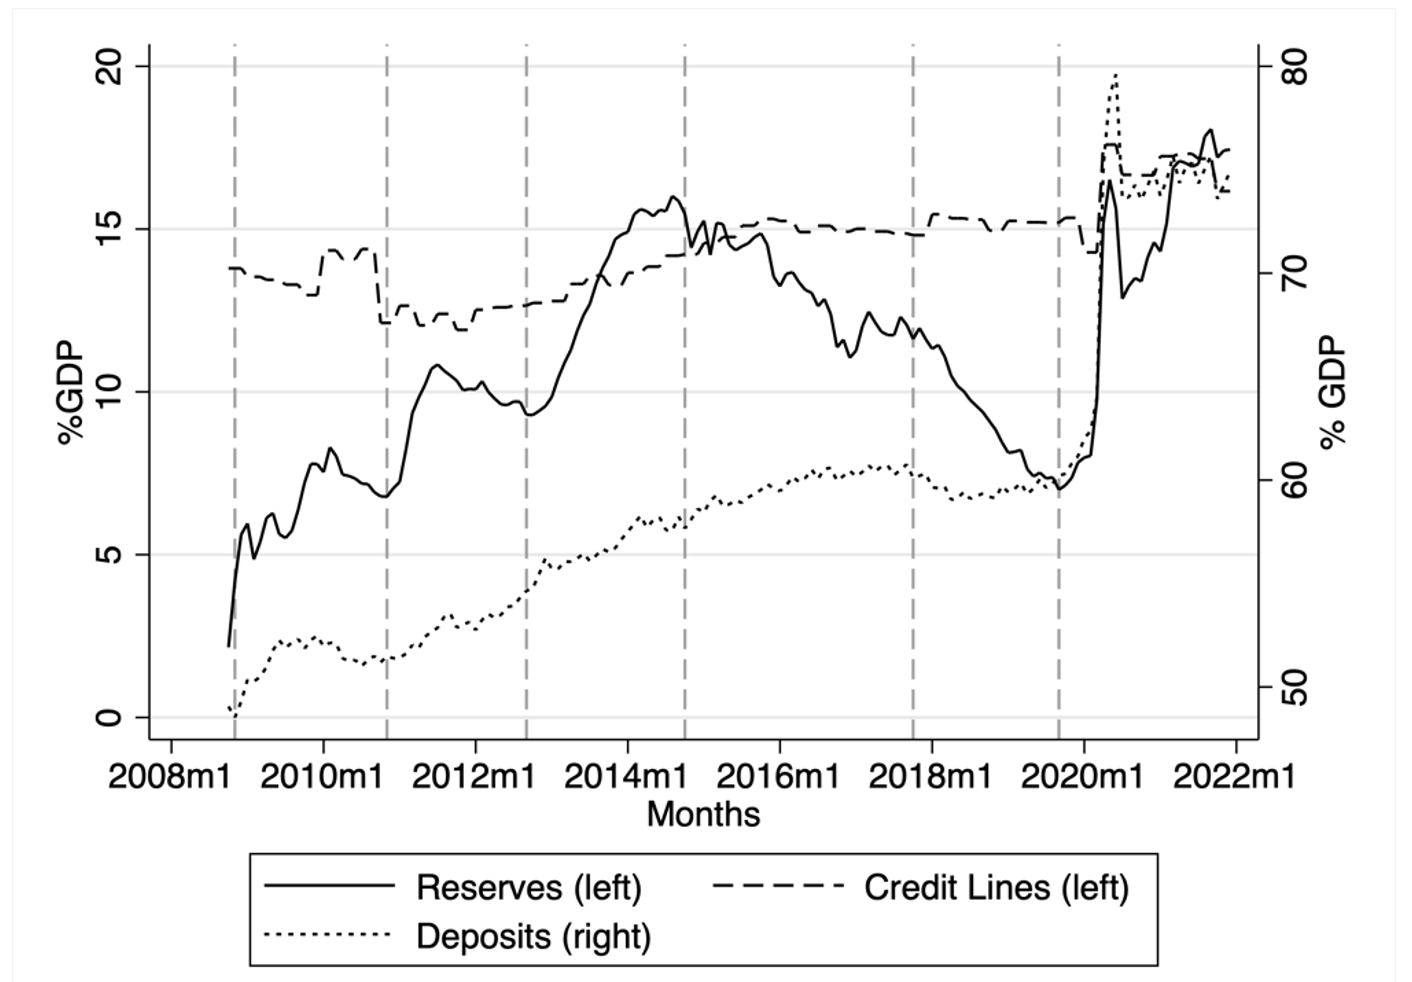 A) Credit lines, deposits, and reserves as a percentage of GDP